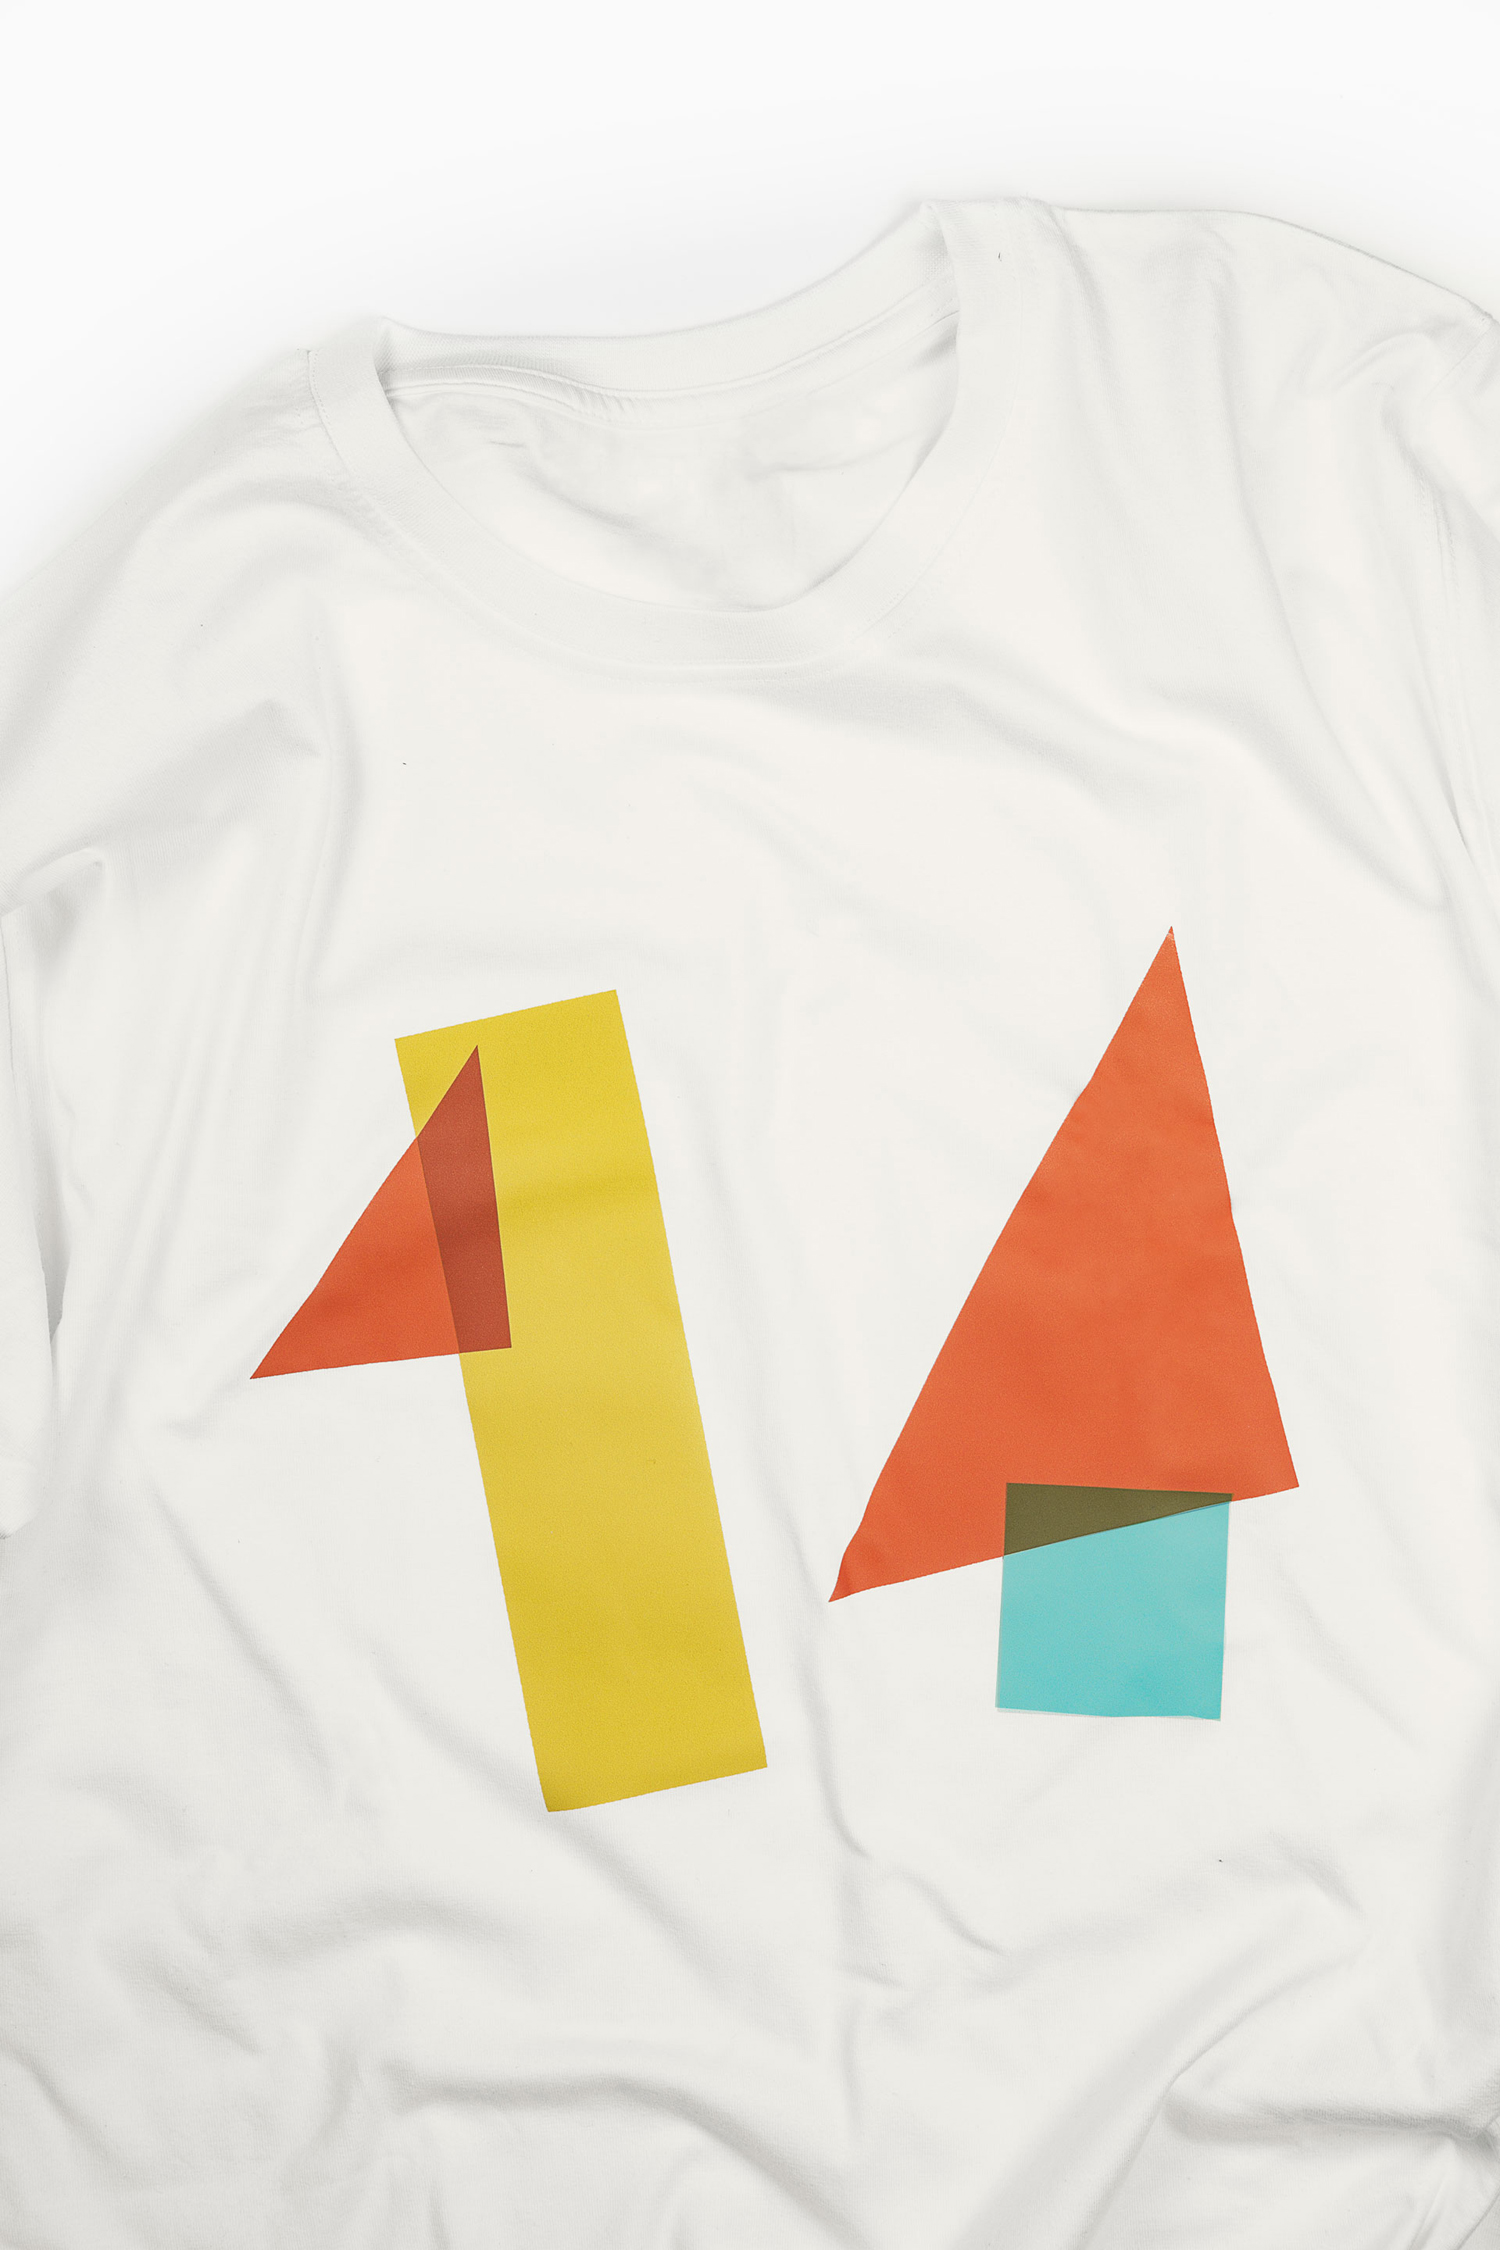 Logo and branded t-shirt designed by Bedow for Swedish creative development studio 14islands